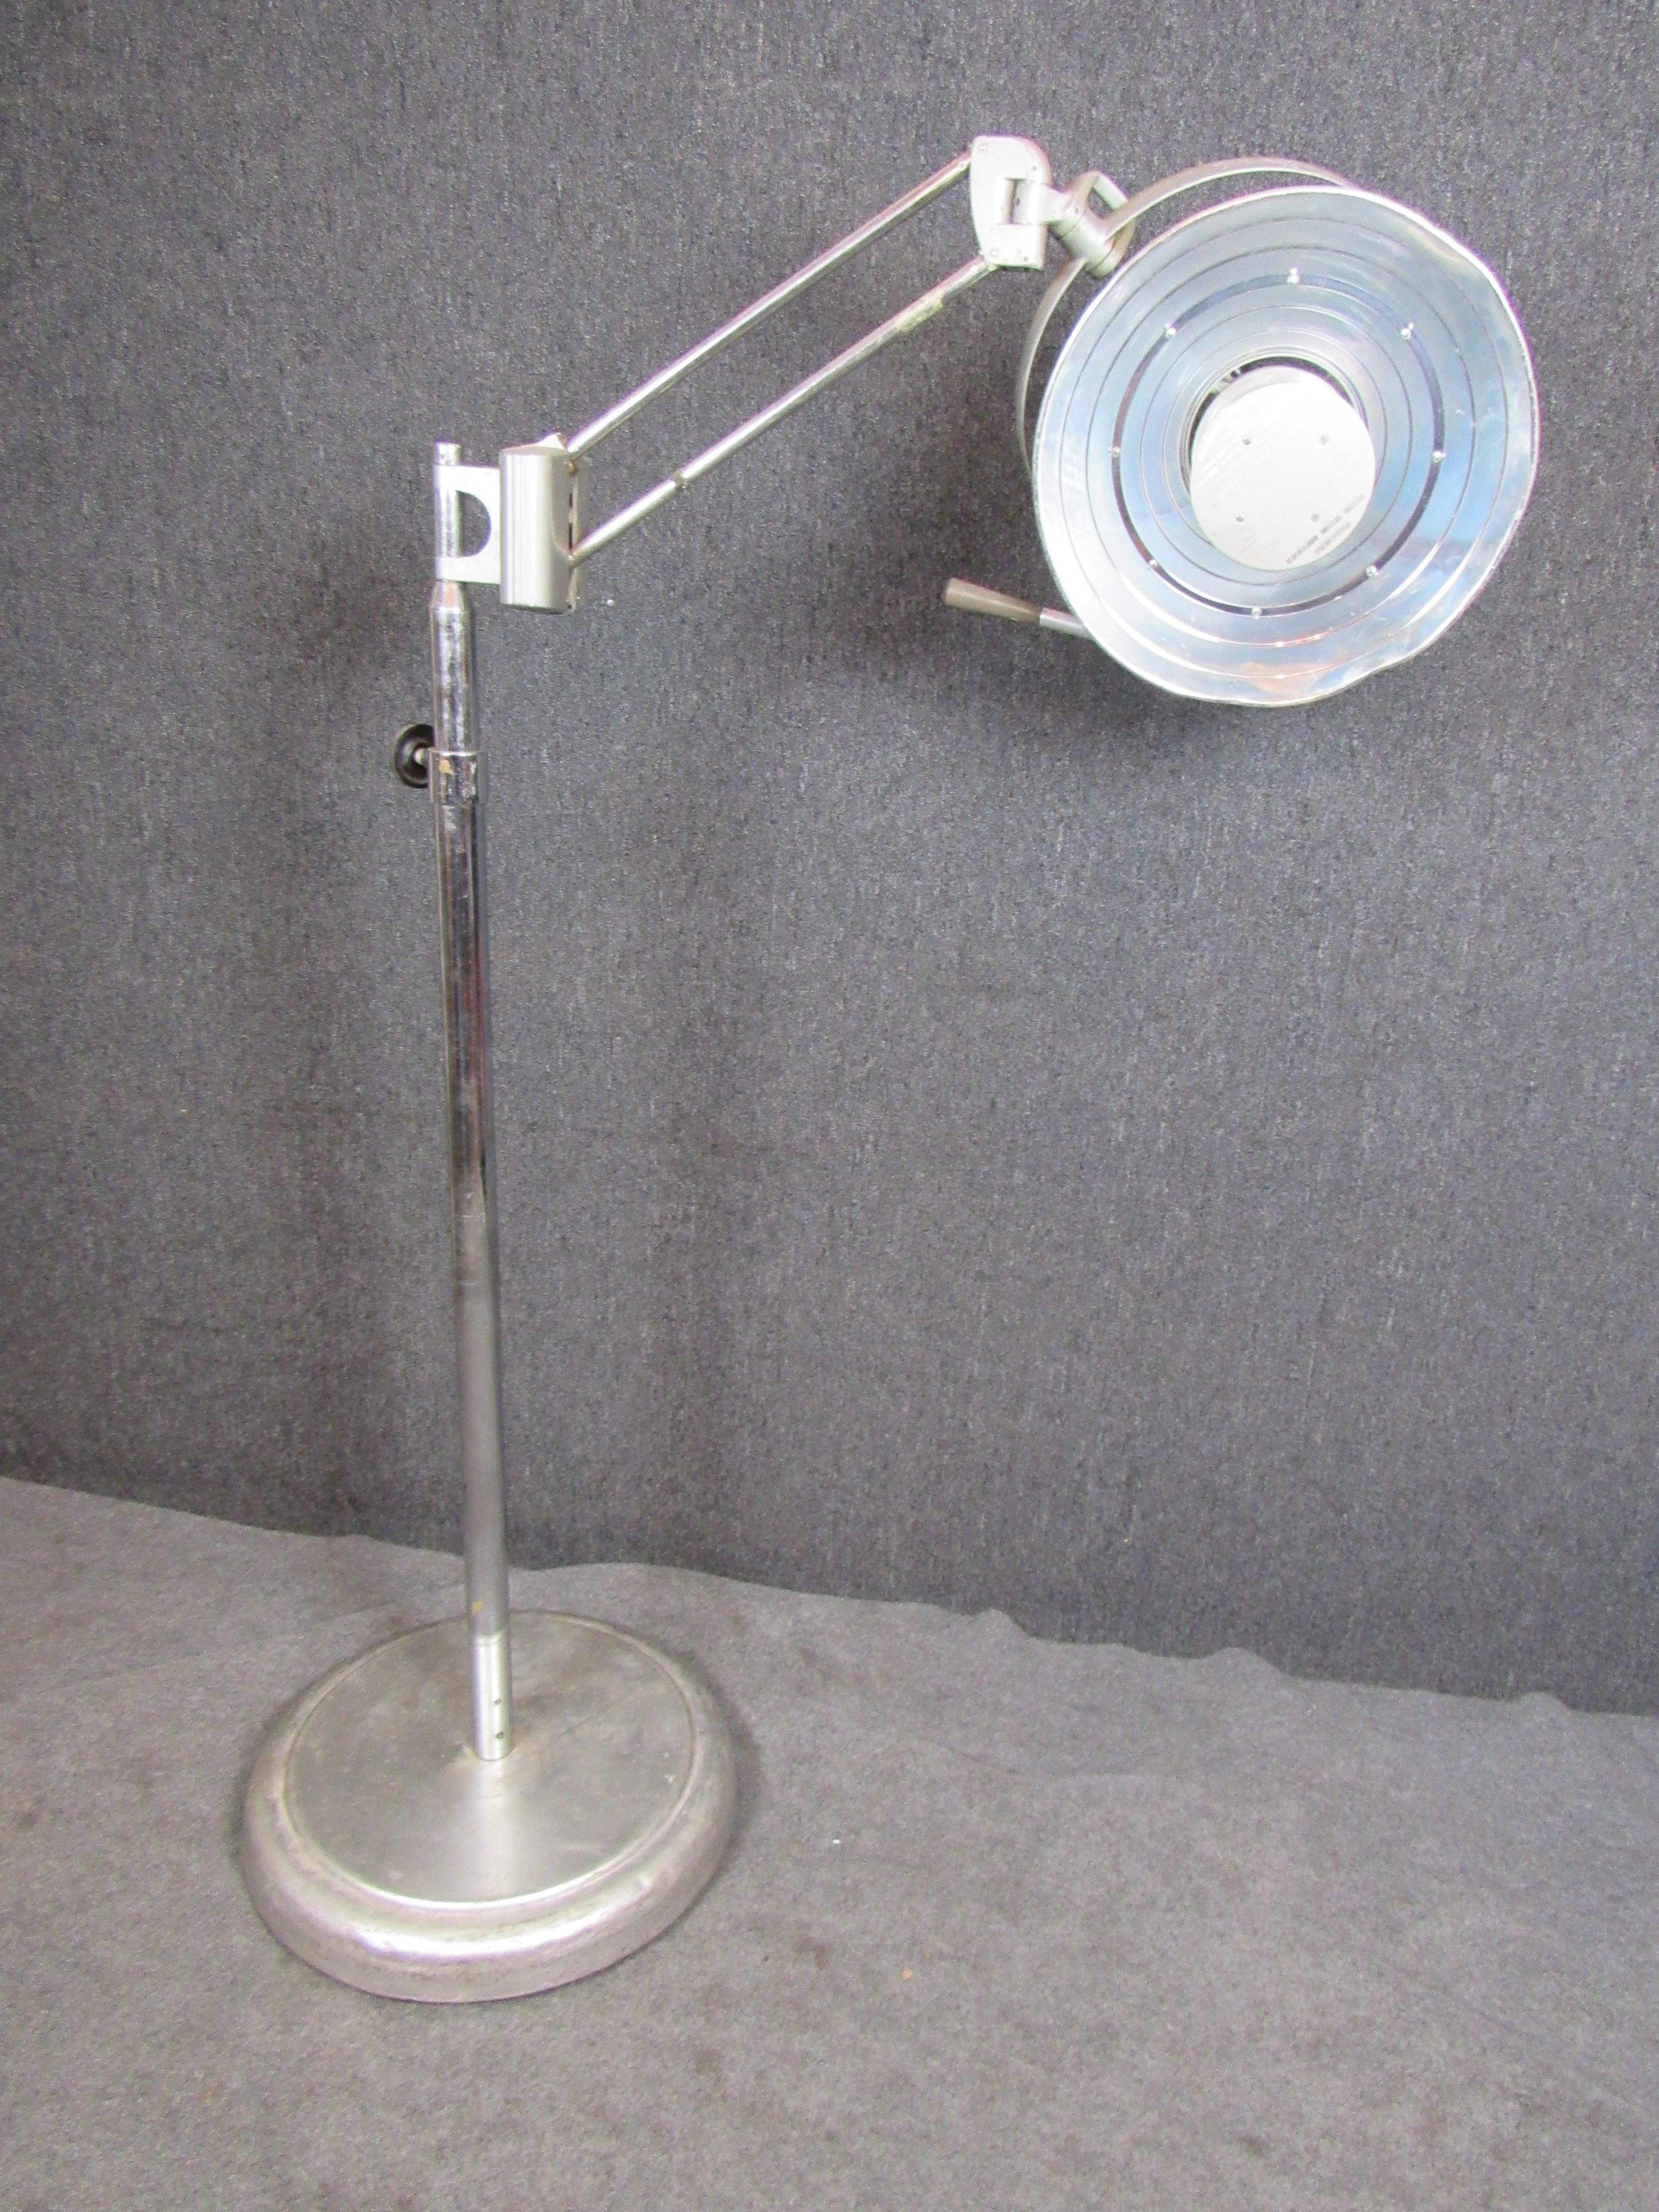 American Explosion Proof Operating Light by Wilmot Castle For Sale